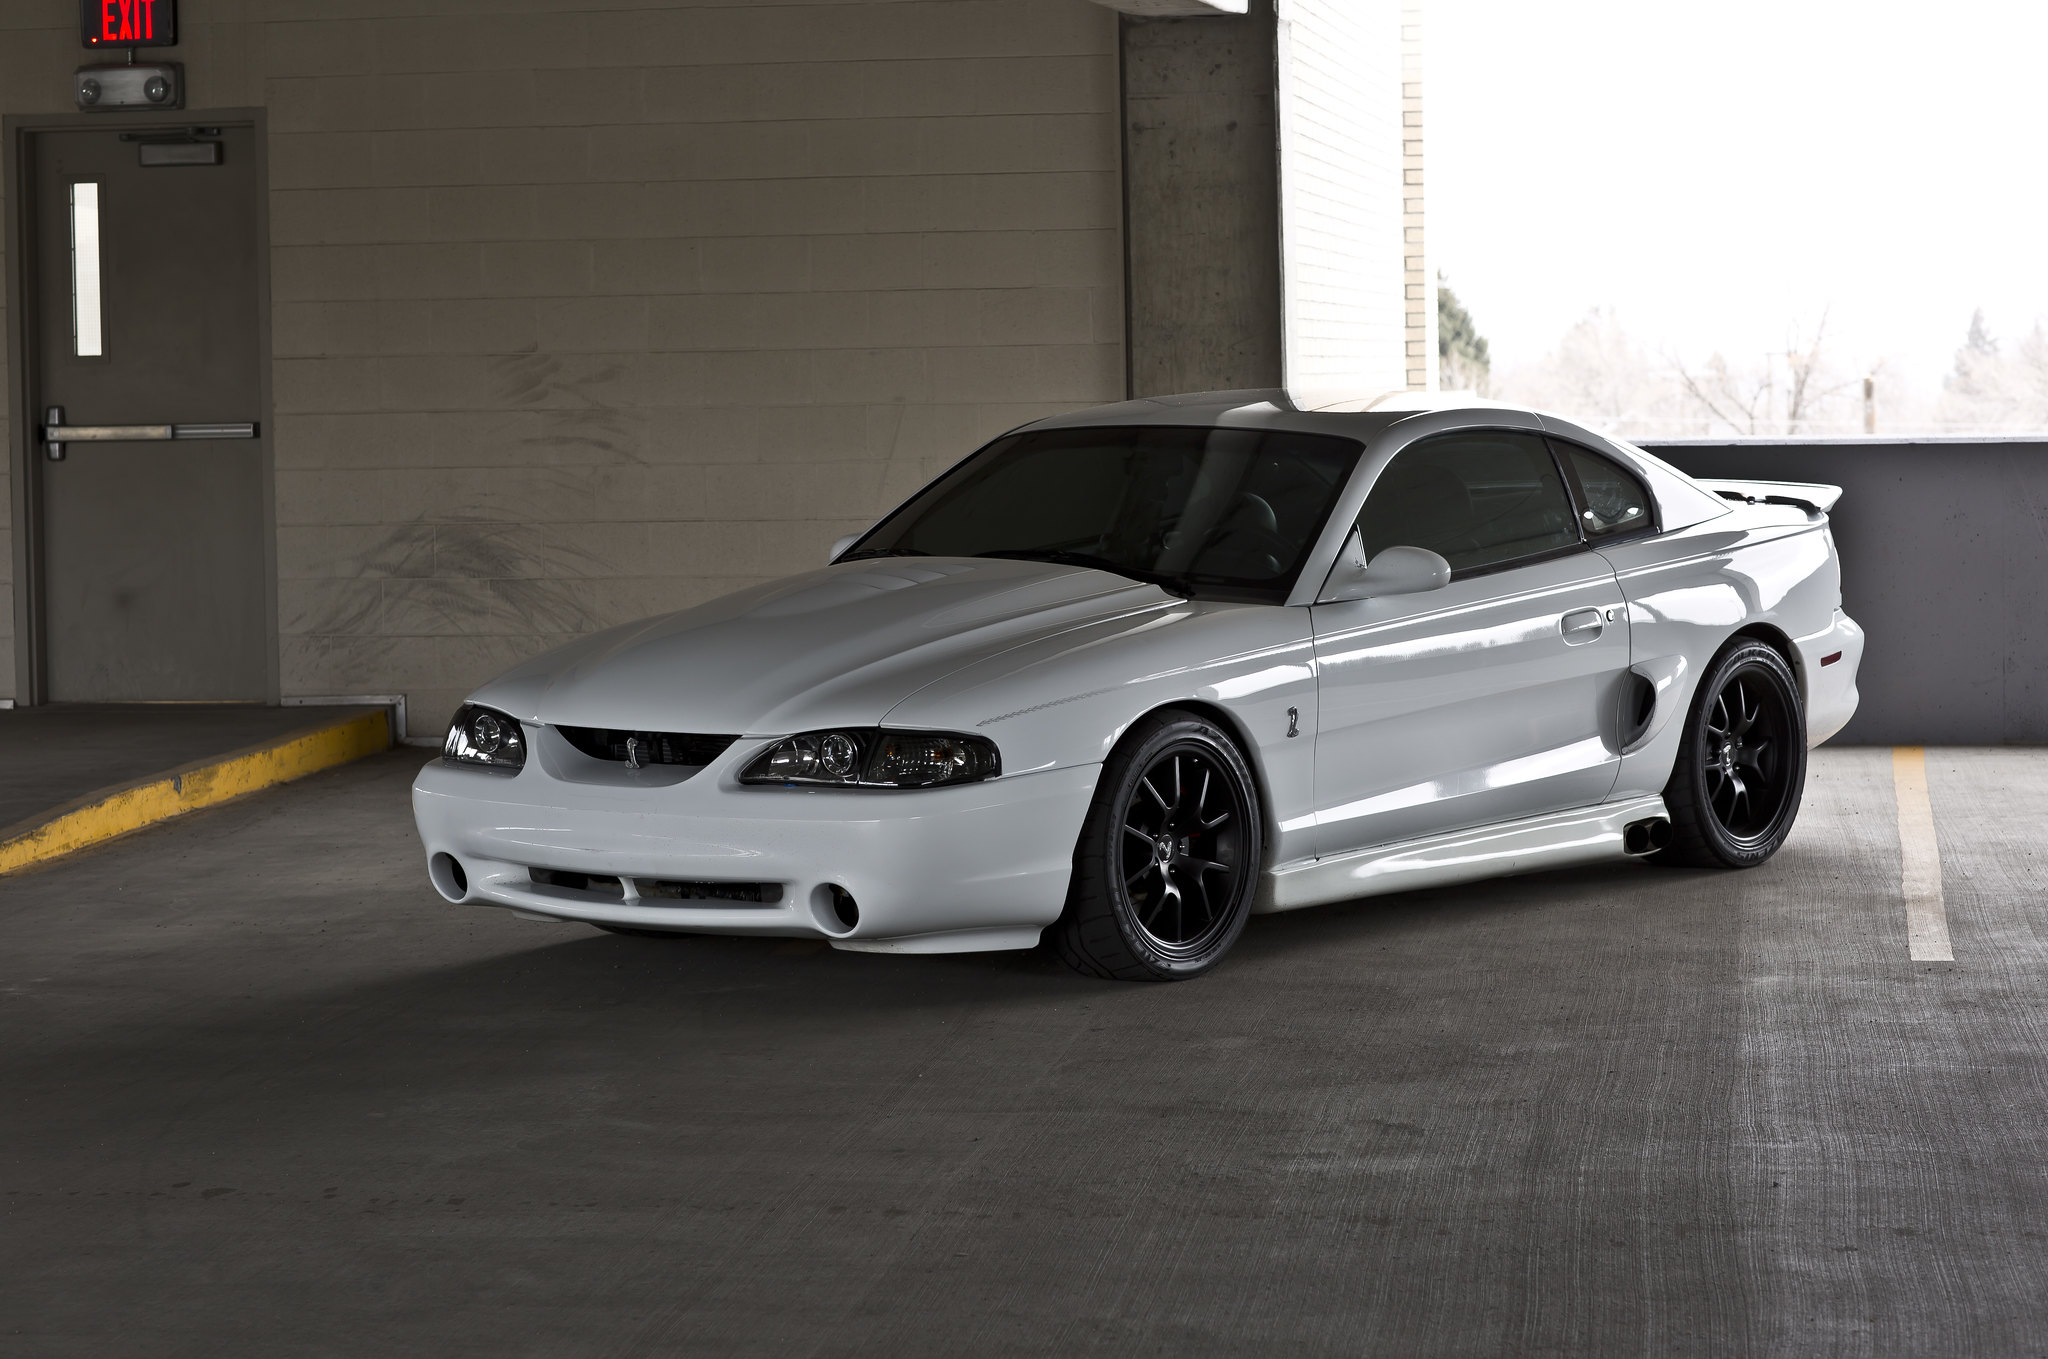 Sn95 Mustang White Related Keywords & Suggestions - Sn95 Mus